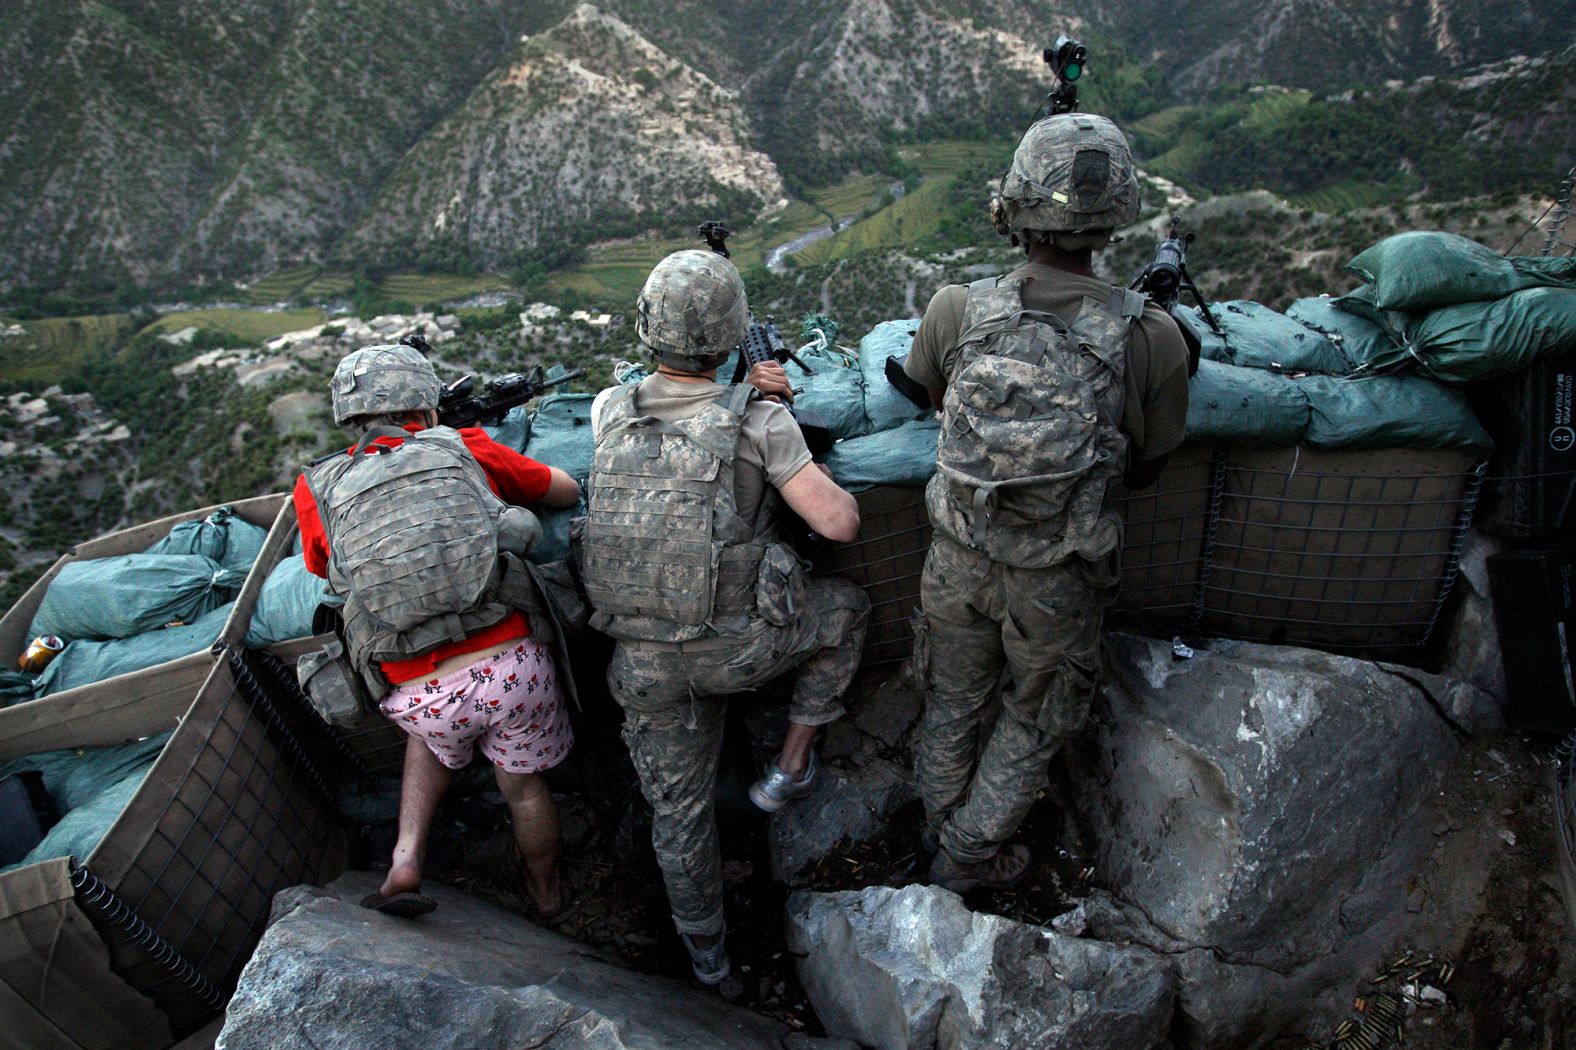 US soldiers take defensive positions after receiving fire from Taliban positions in Afghanistan's Korengal Valley in May 2009. Army Spc. Zachary Boyd was still in his "I love NY" boxers because he rushed from his sleeping quarters to join his fellow platoon members. 